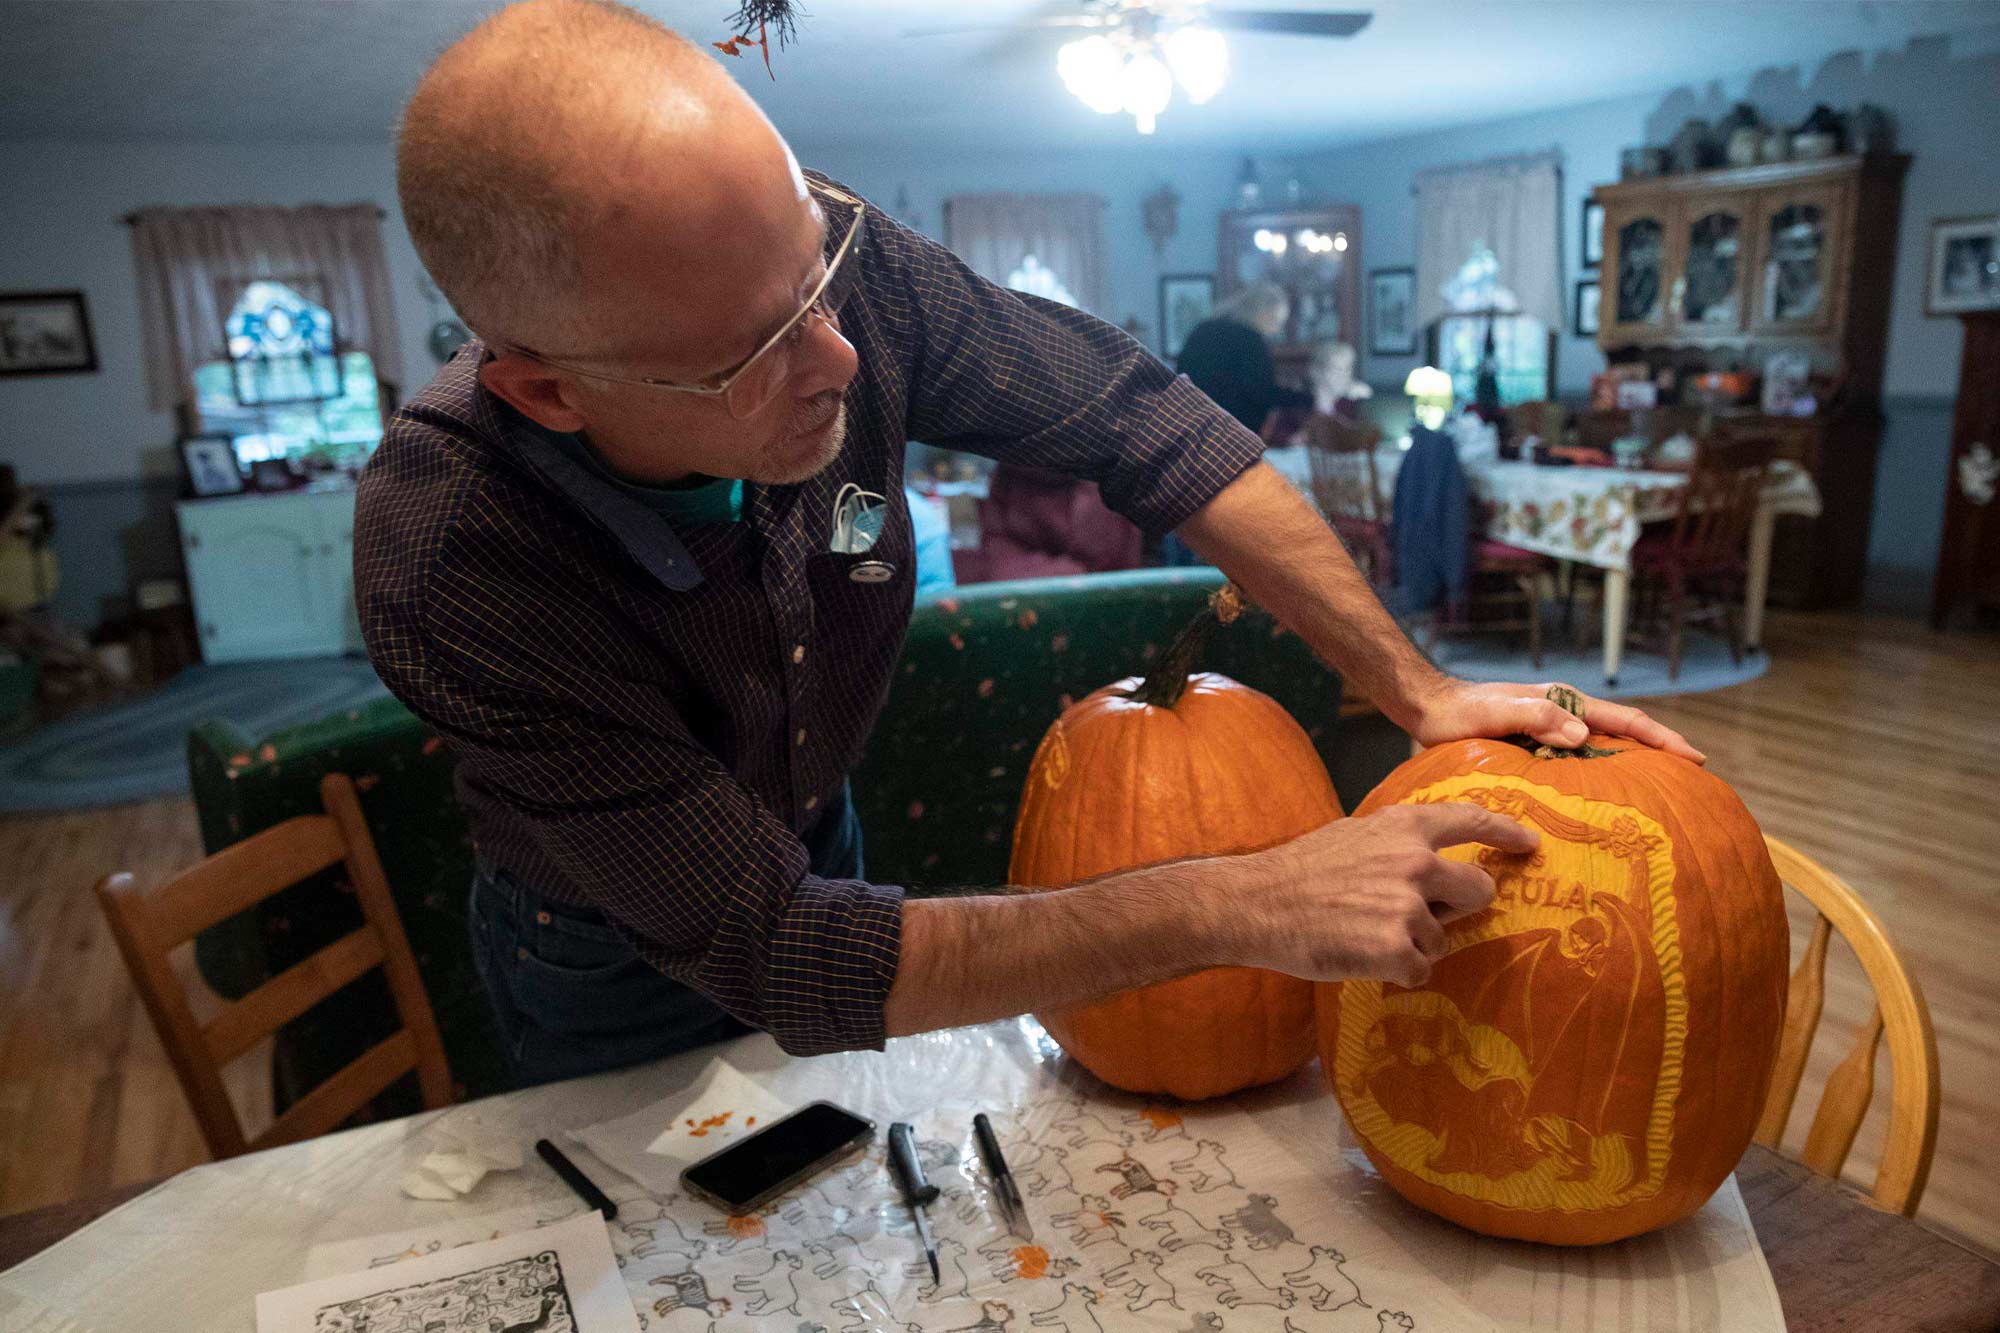 Pumpkin Carving Knife: Master the Art of Pumpkin Carving with Precision